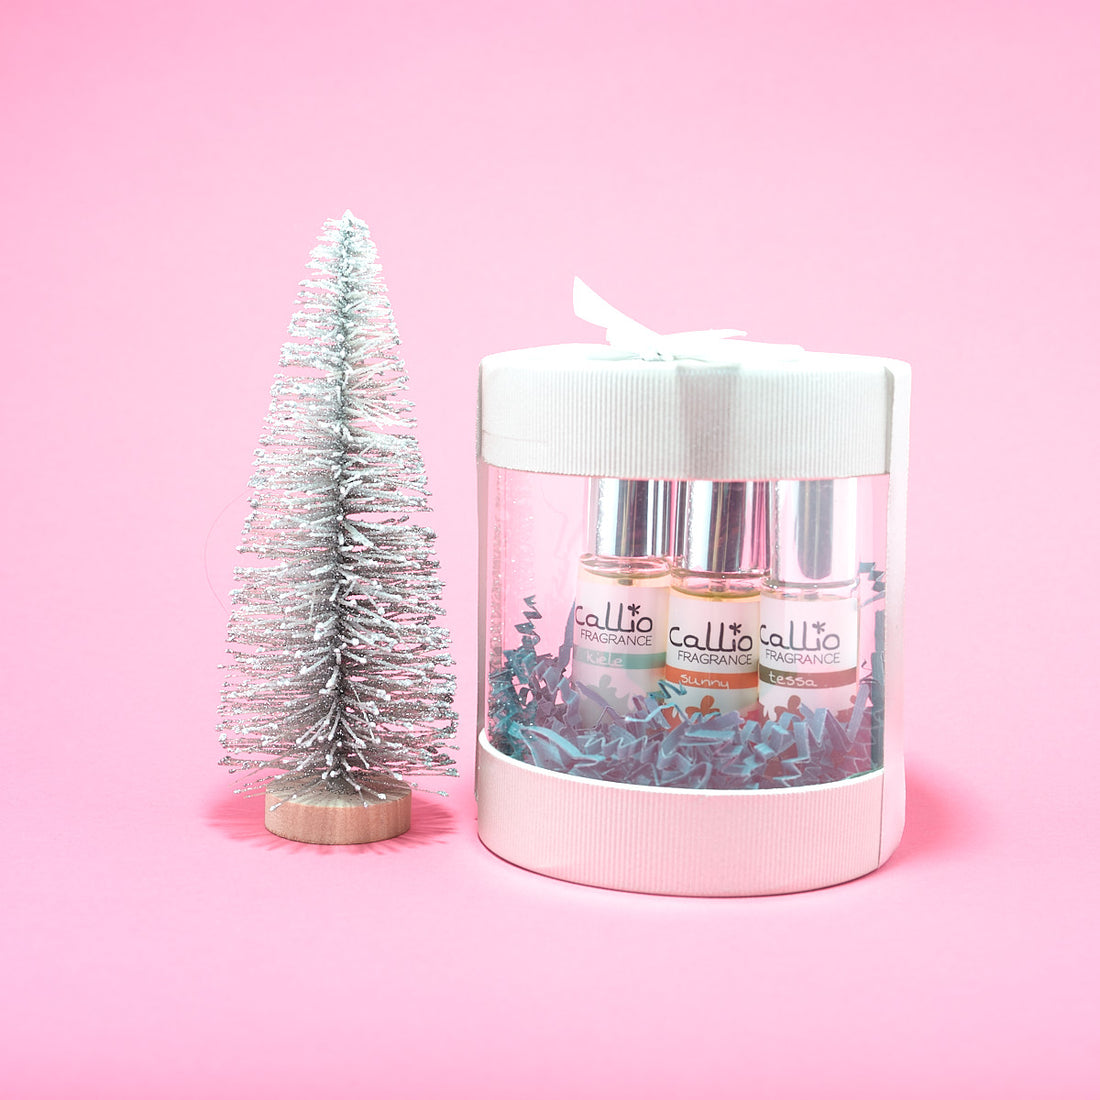 Perfume Trio Gift Set on a light pink background with a silver brush tree.